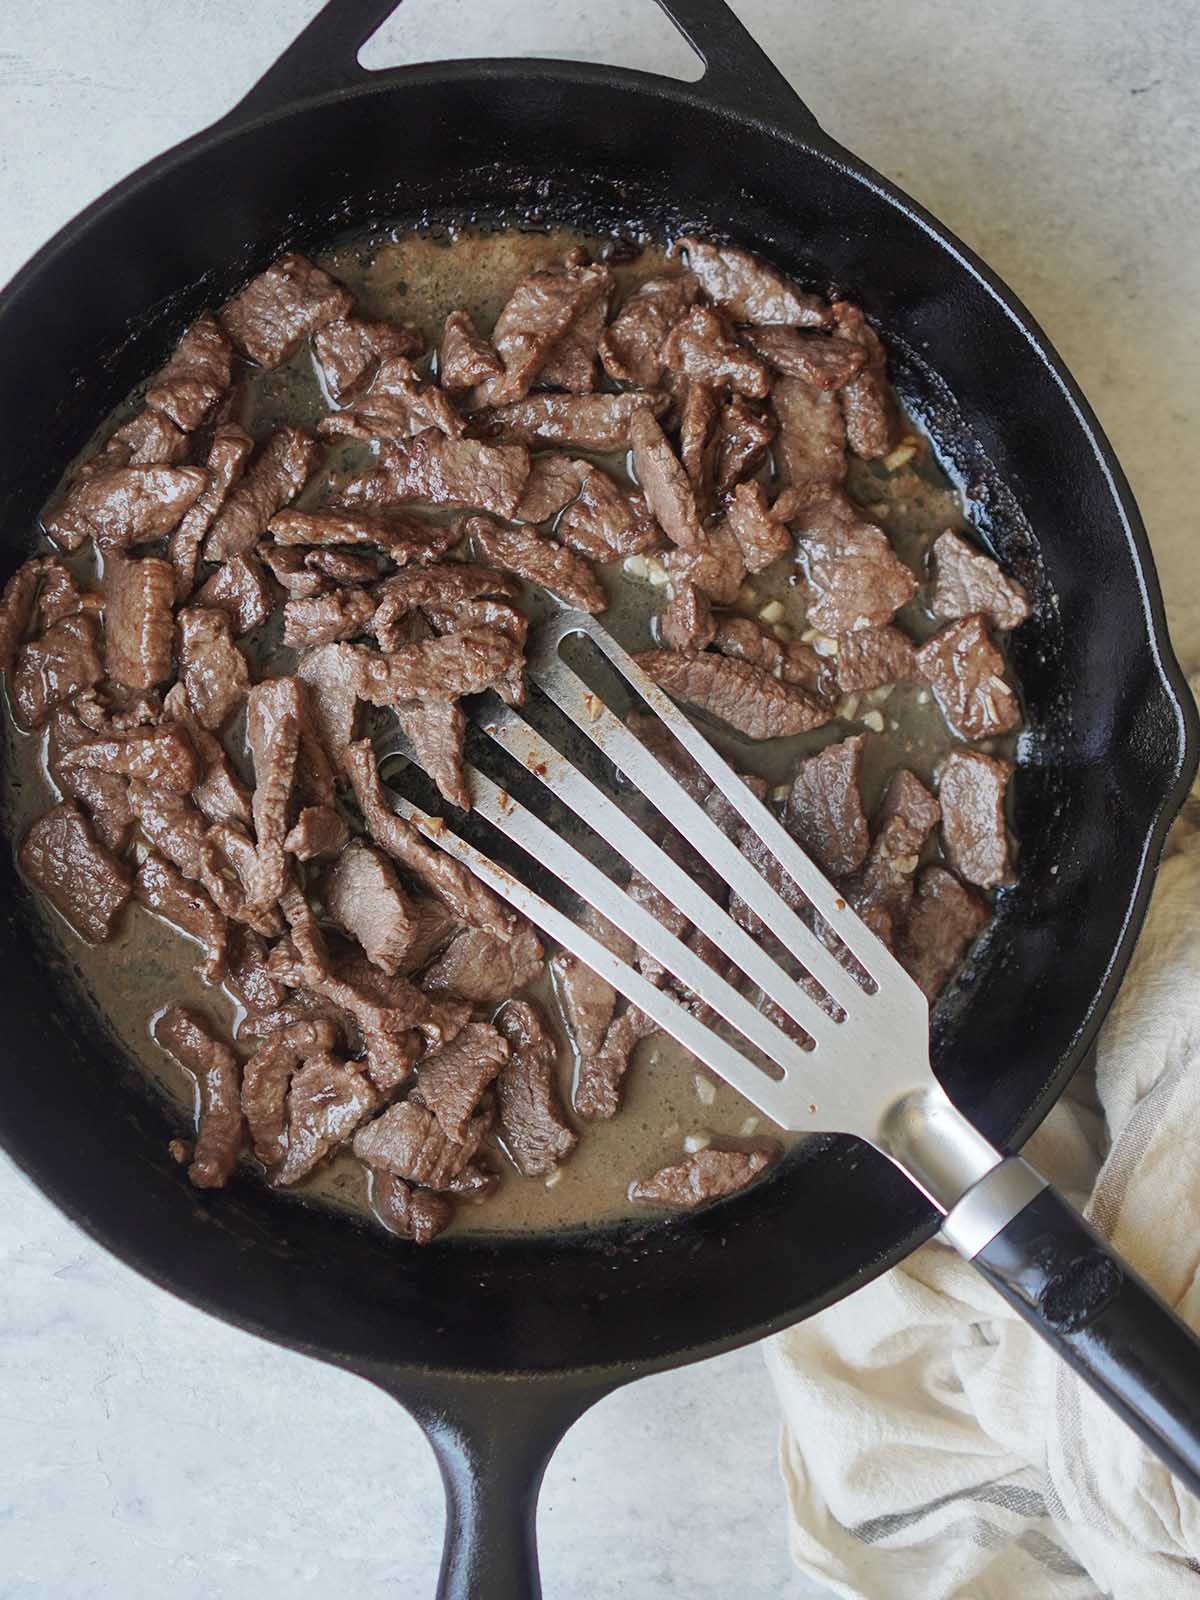 A skillet with cooked beef.